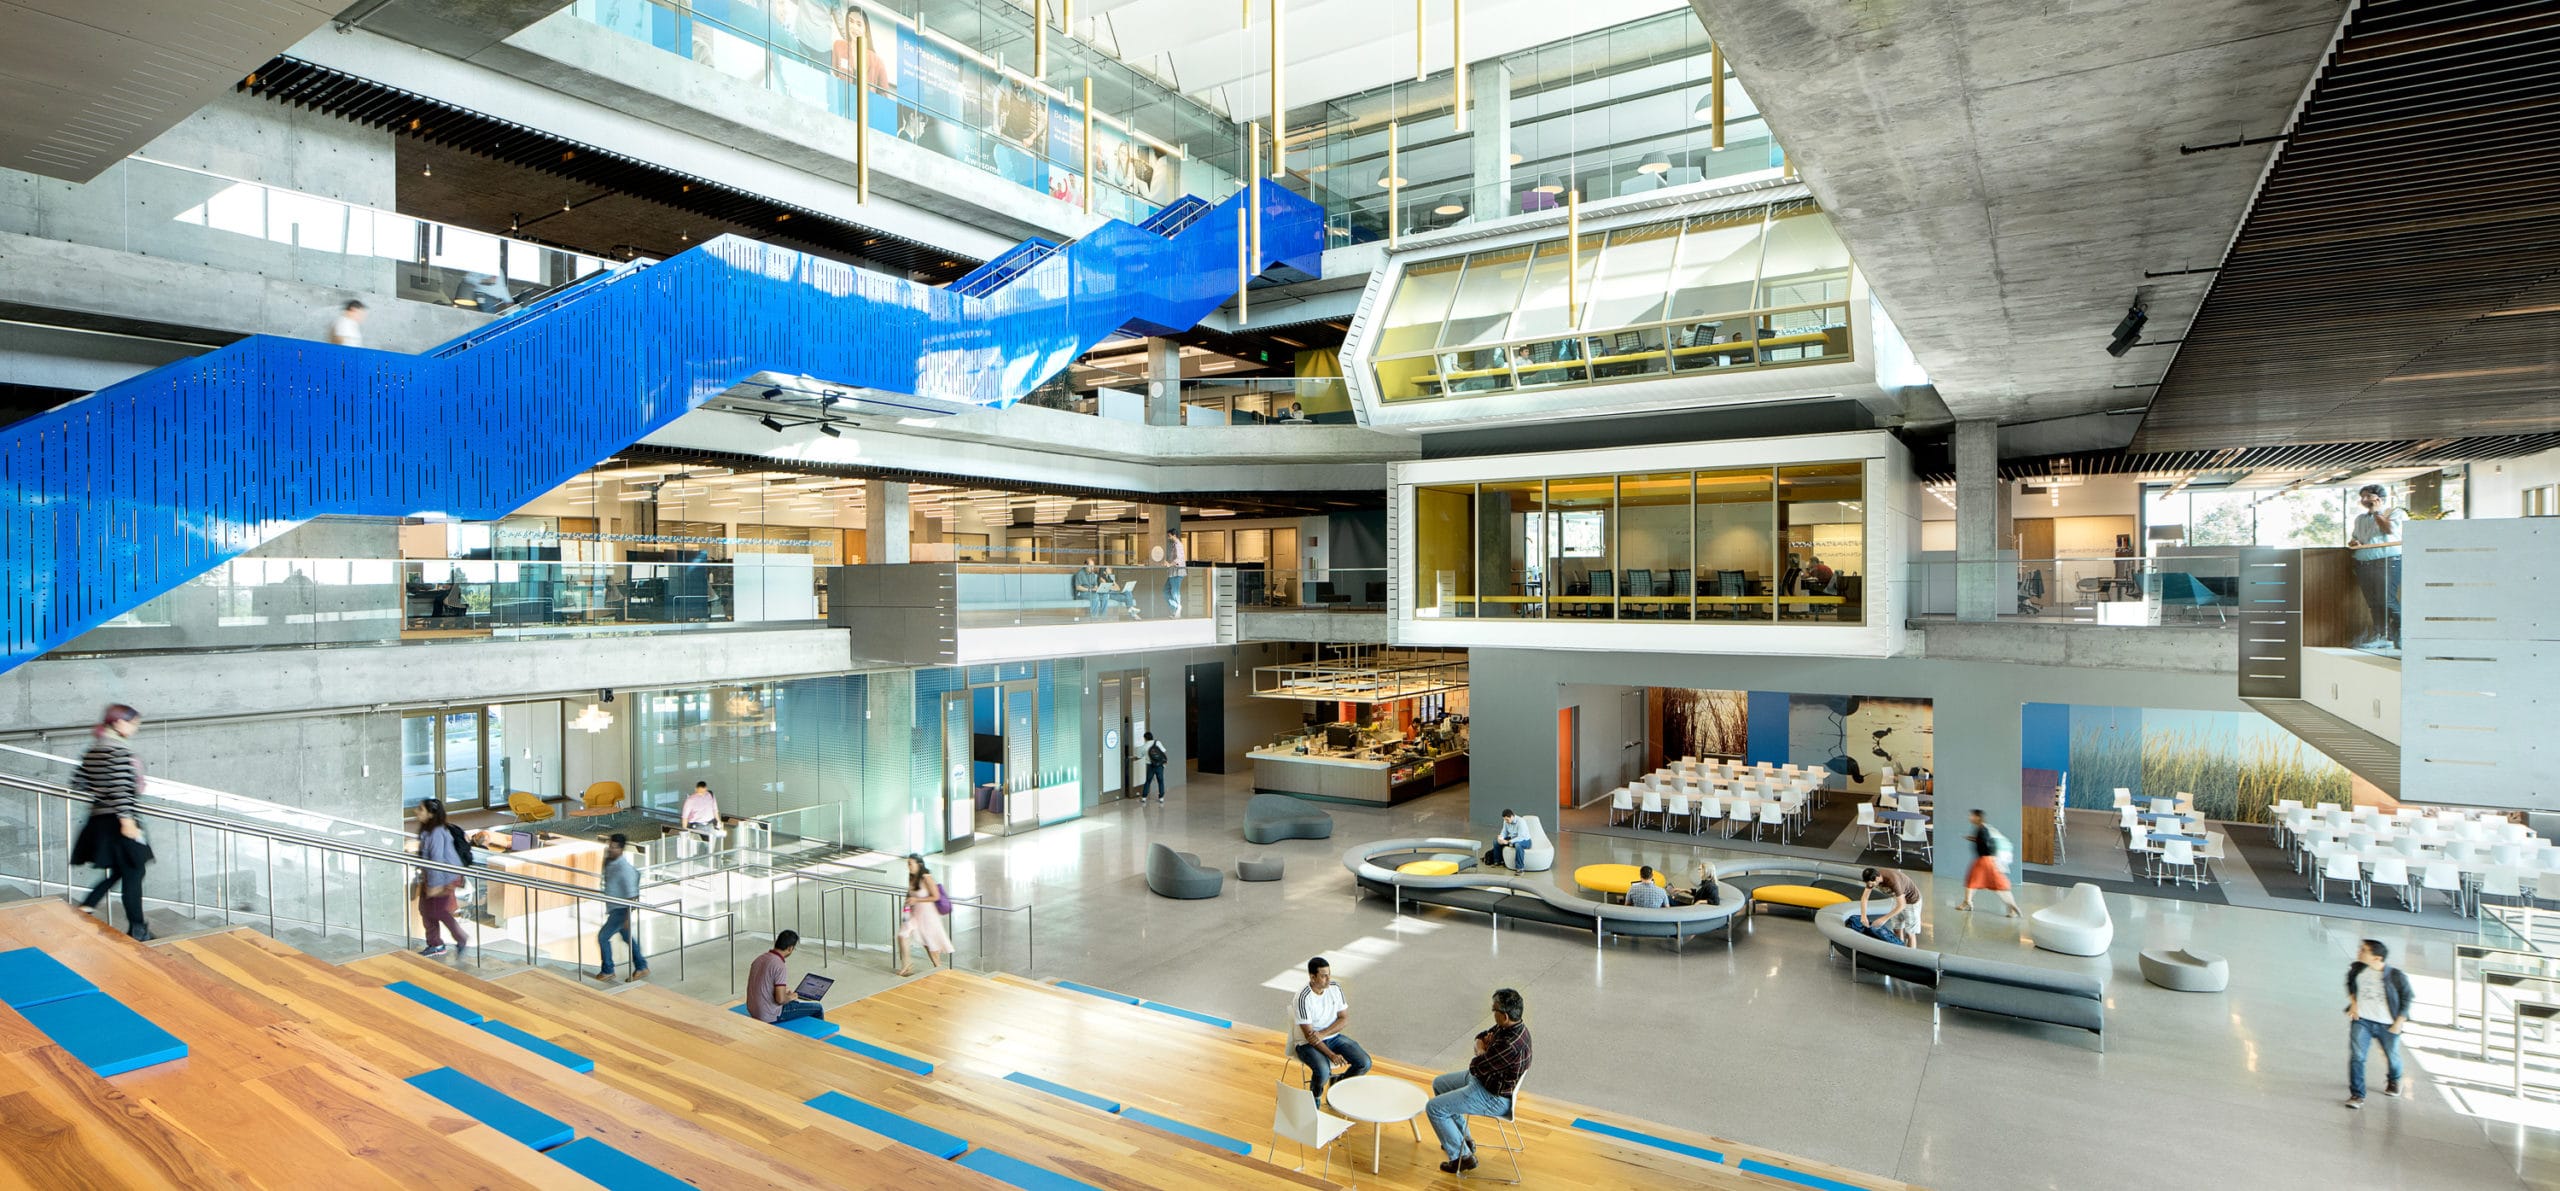 Workplace Well-Being is Prioritized in the Design of Intuit’s New Campus